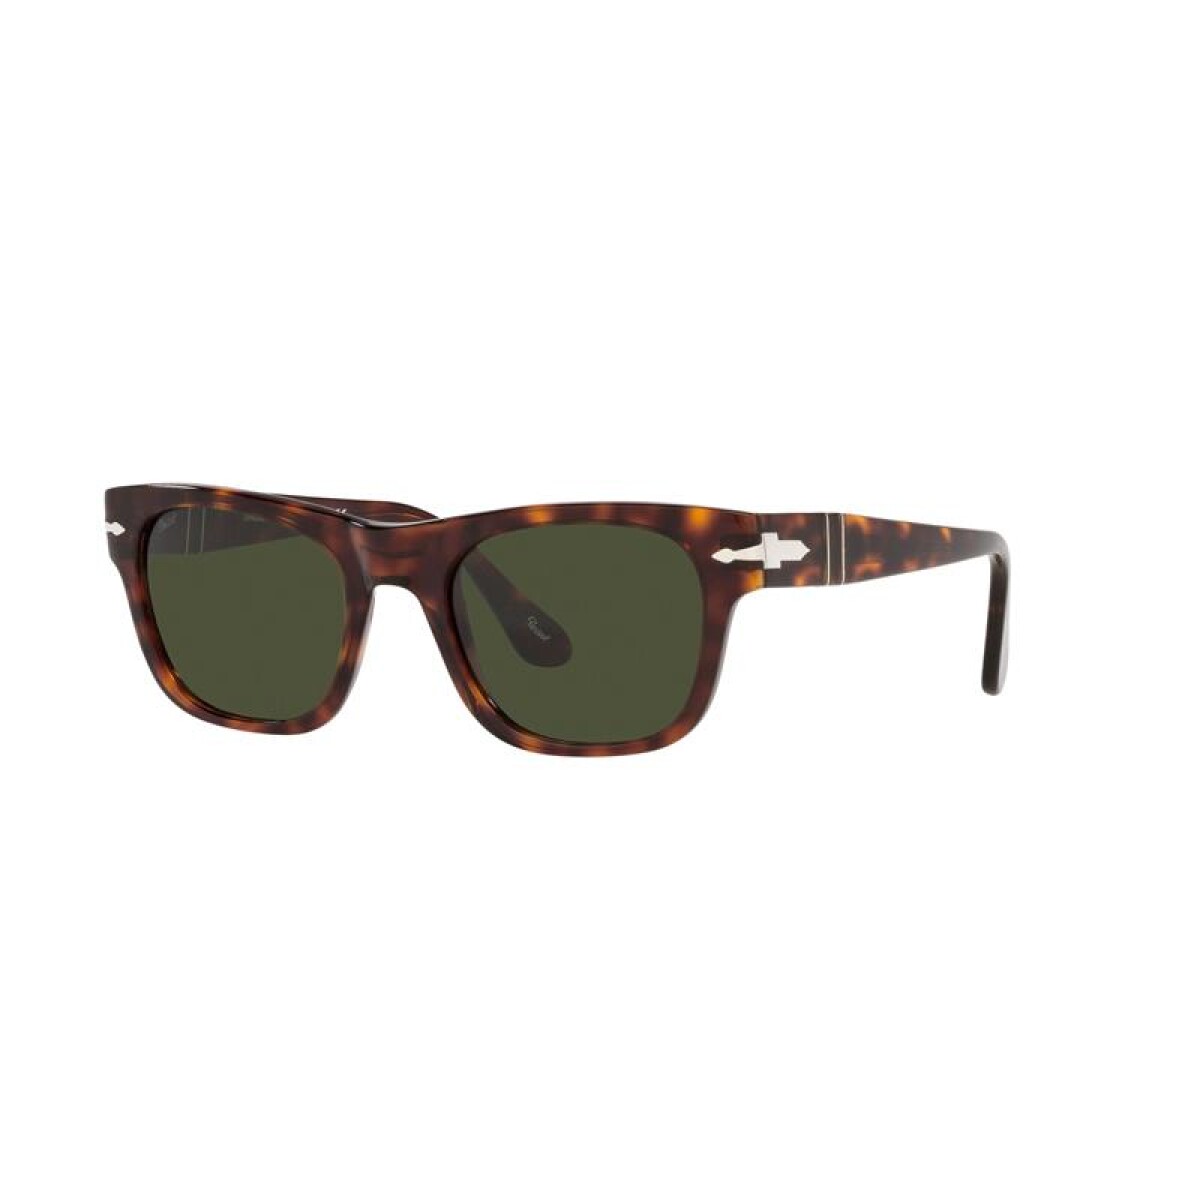 Persol 3269-s - 24/31 